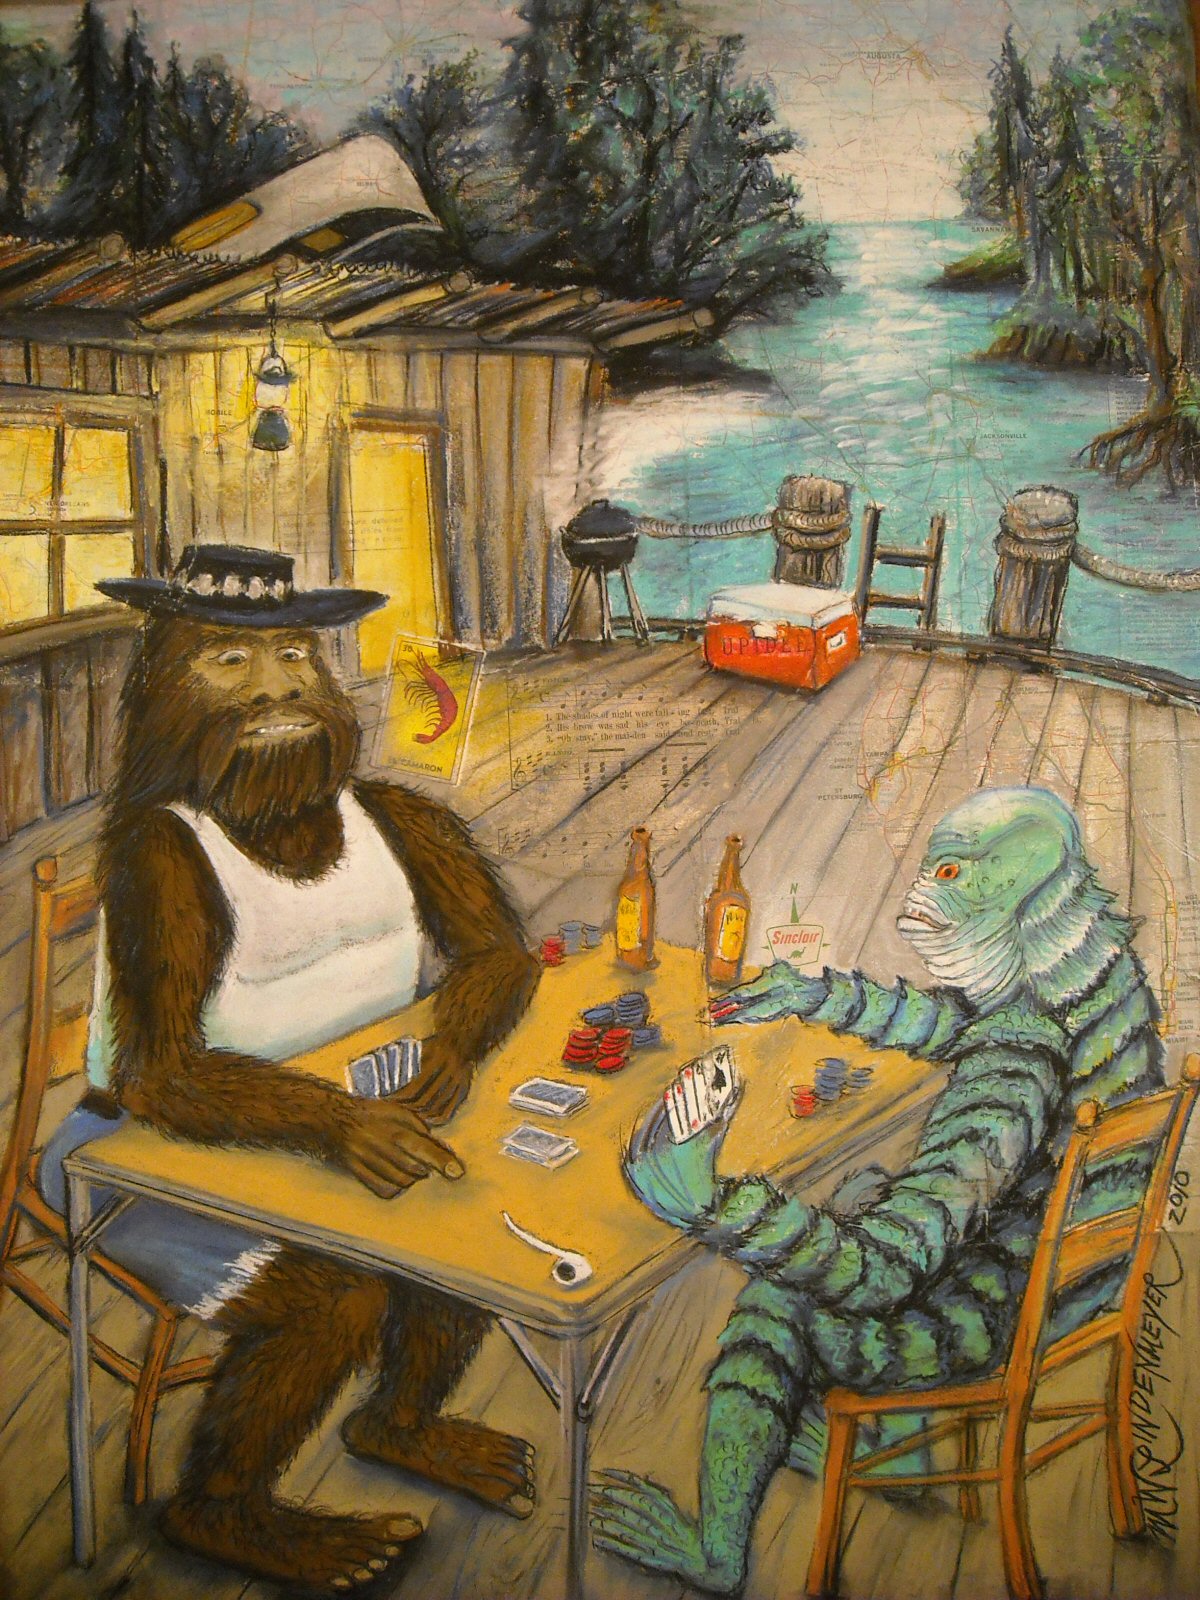 Bigfoot Art by Michael Lindenmeyer ©2004 All Rights Reserved